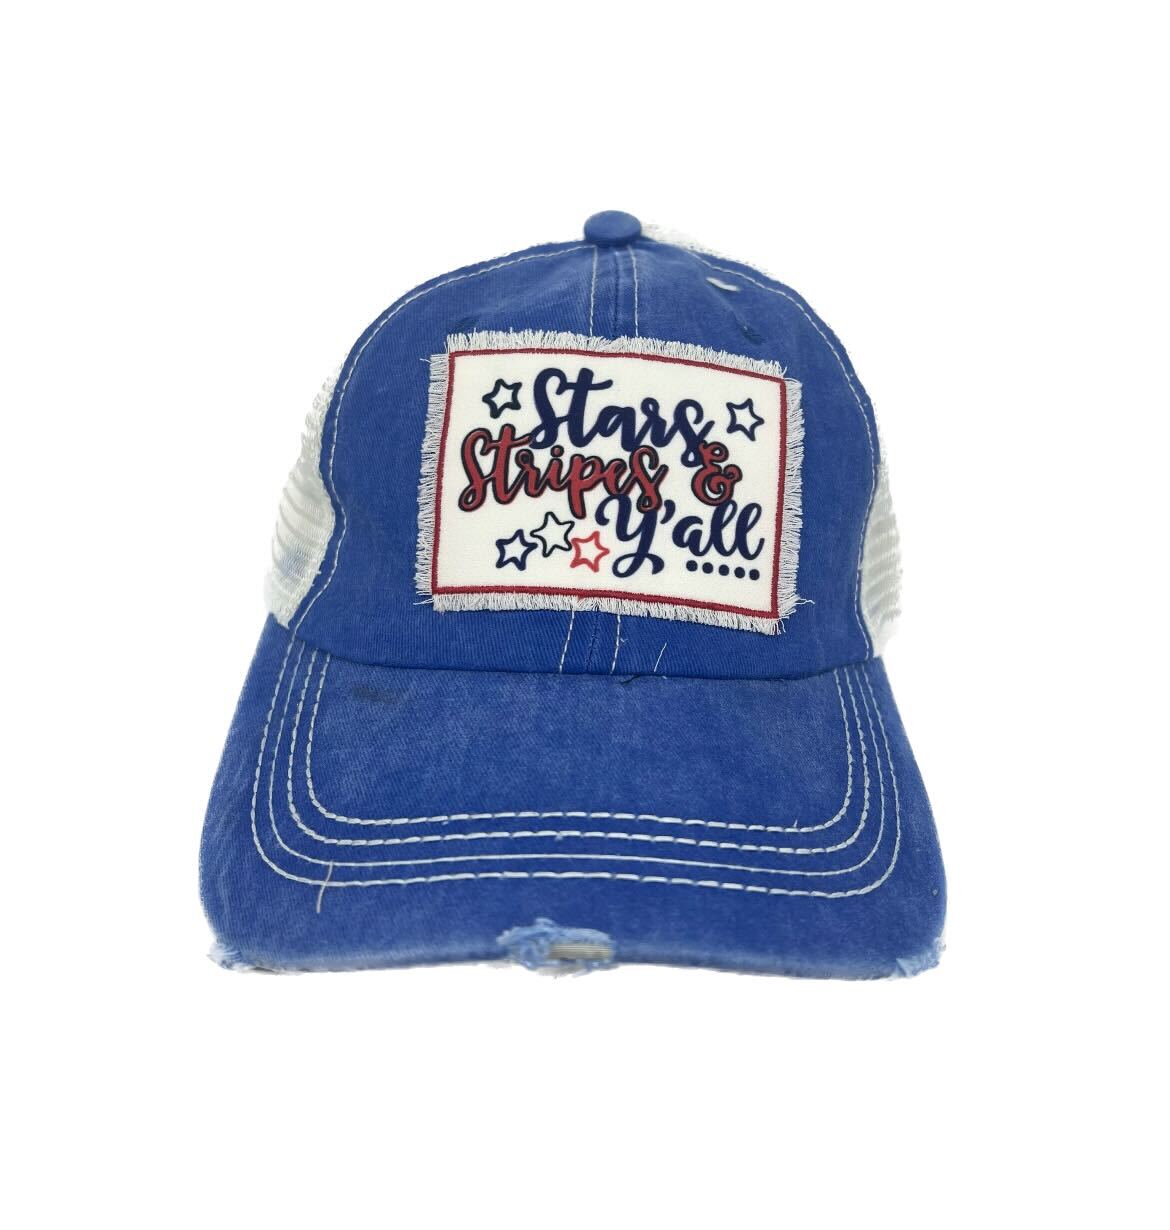 Stars Stripes & Y'all Patch on Blue Distressed Hat with Tan Mesh